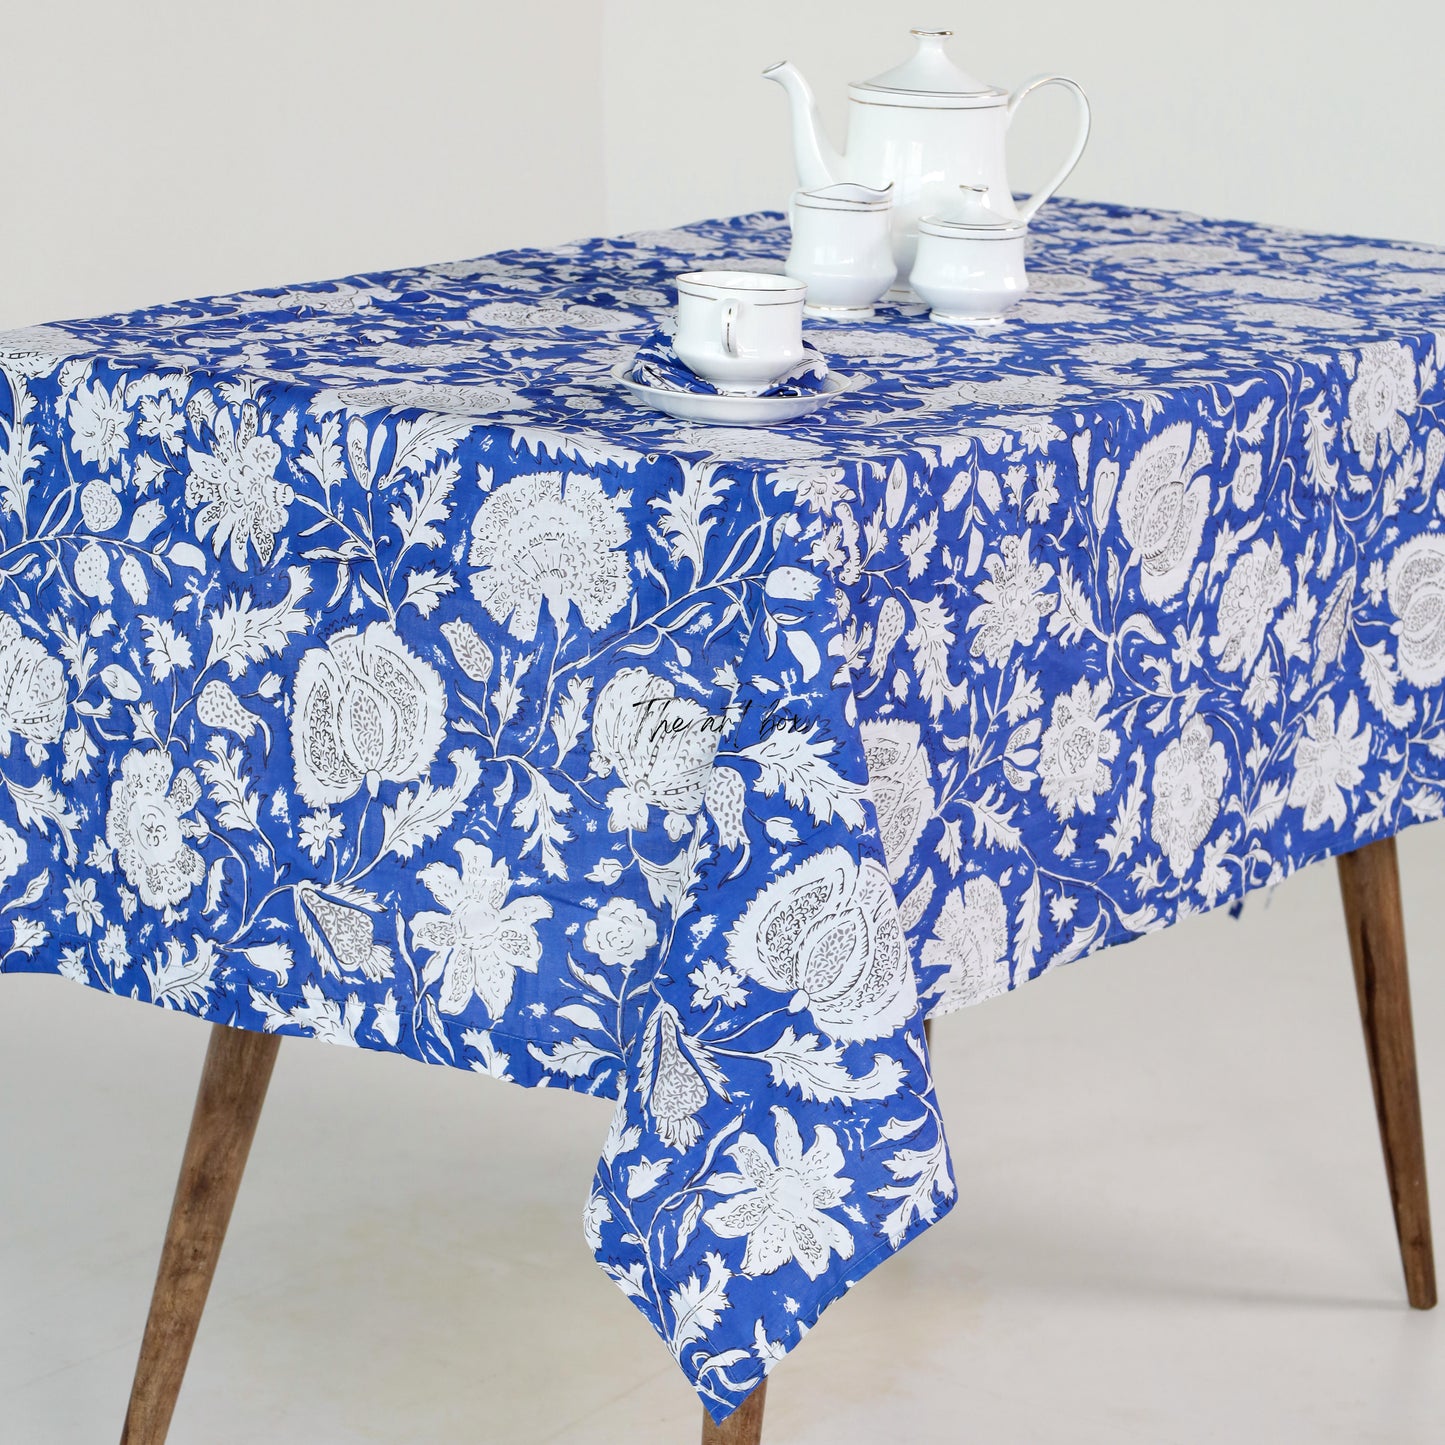 Blue Cotton Printed Tablecloths, 100% Cotton Floral Table Cover